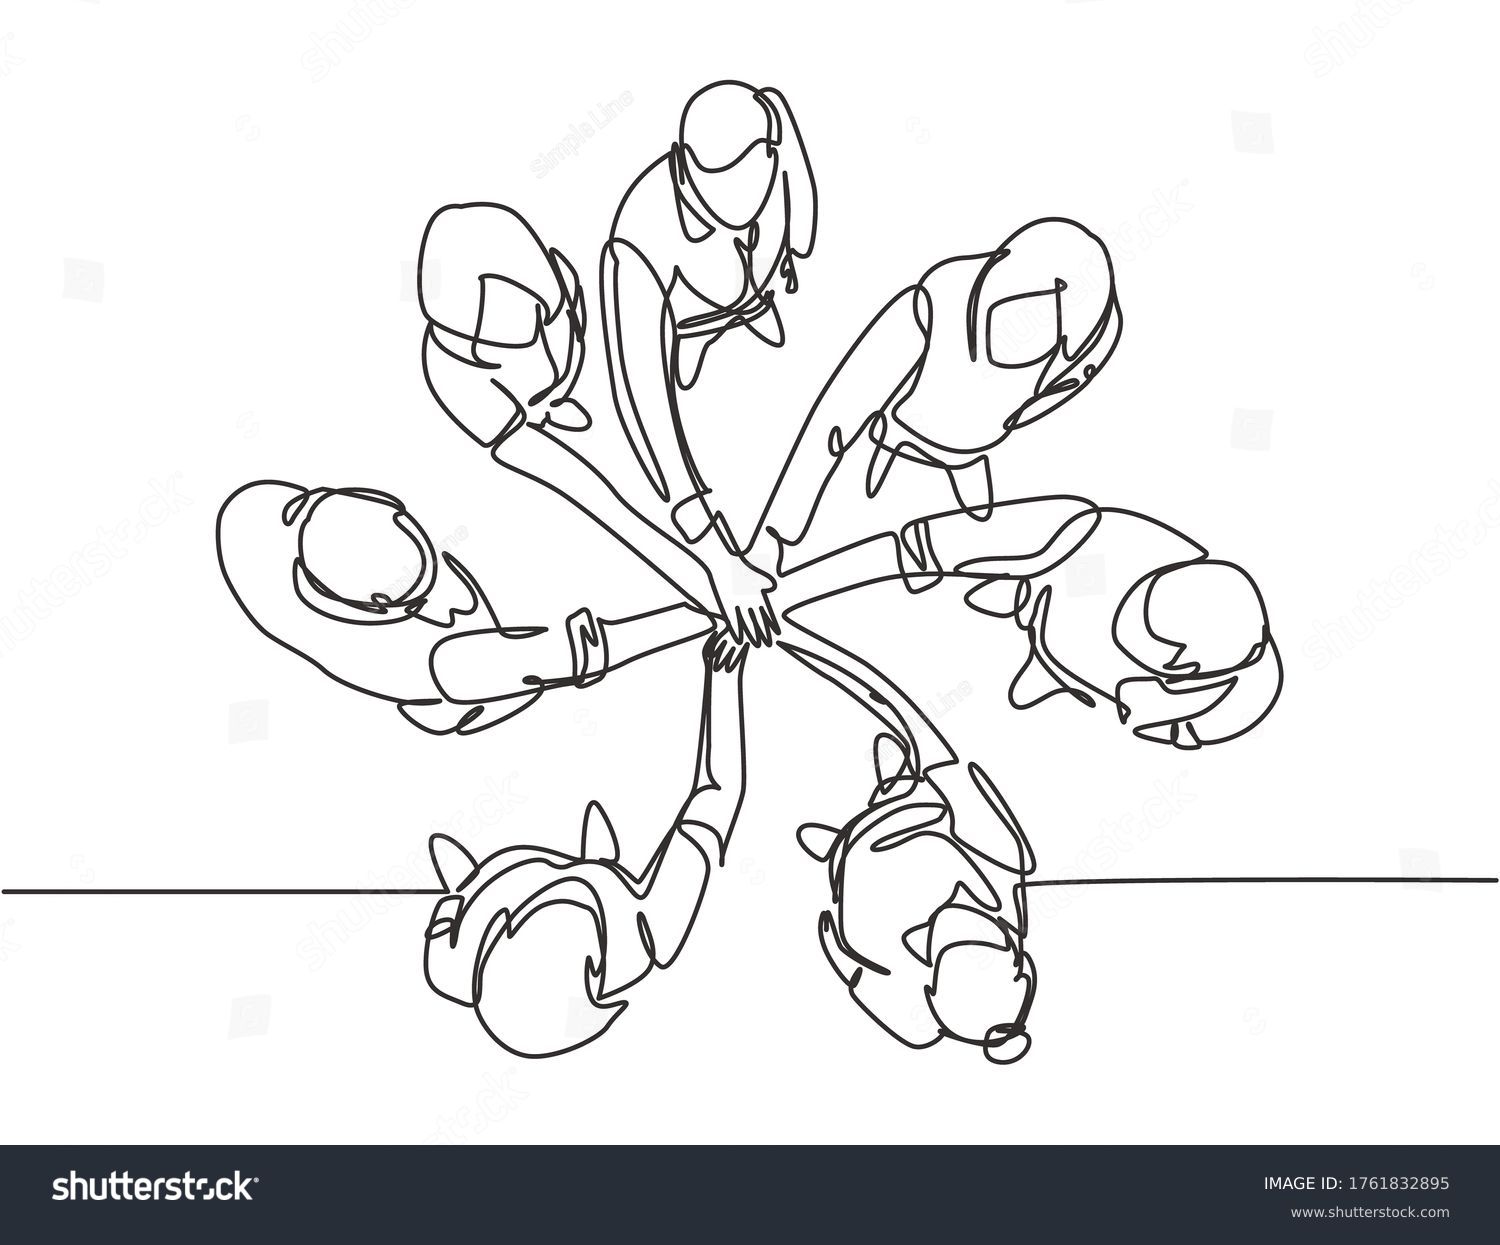 One single line drawing group of young happy business people unite their hands together to form a circle shape symbol, top view. Trendy teamwork concept continuous line draw design vector illustration #1761832895